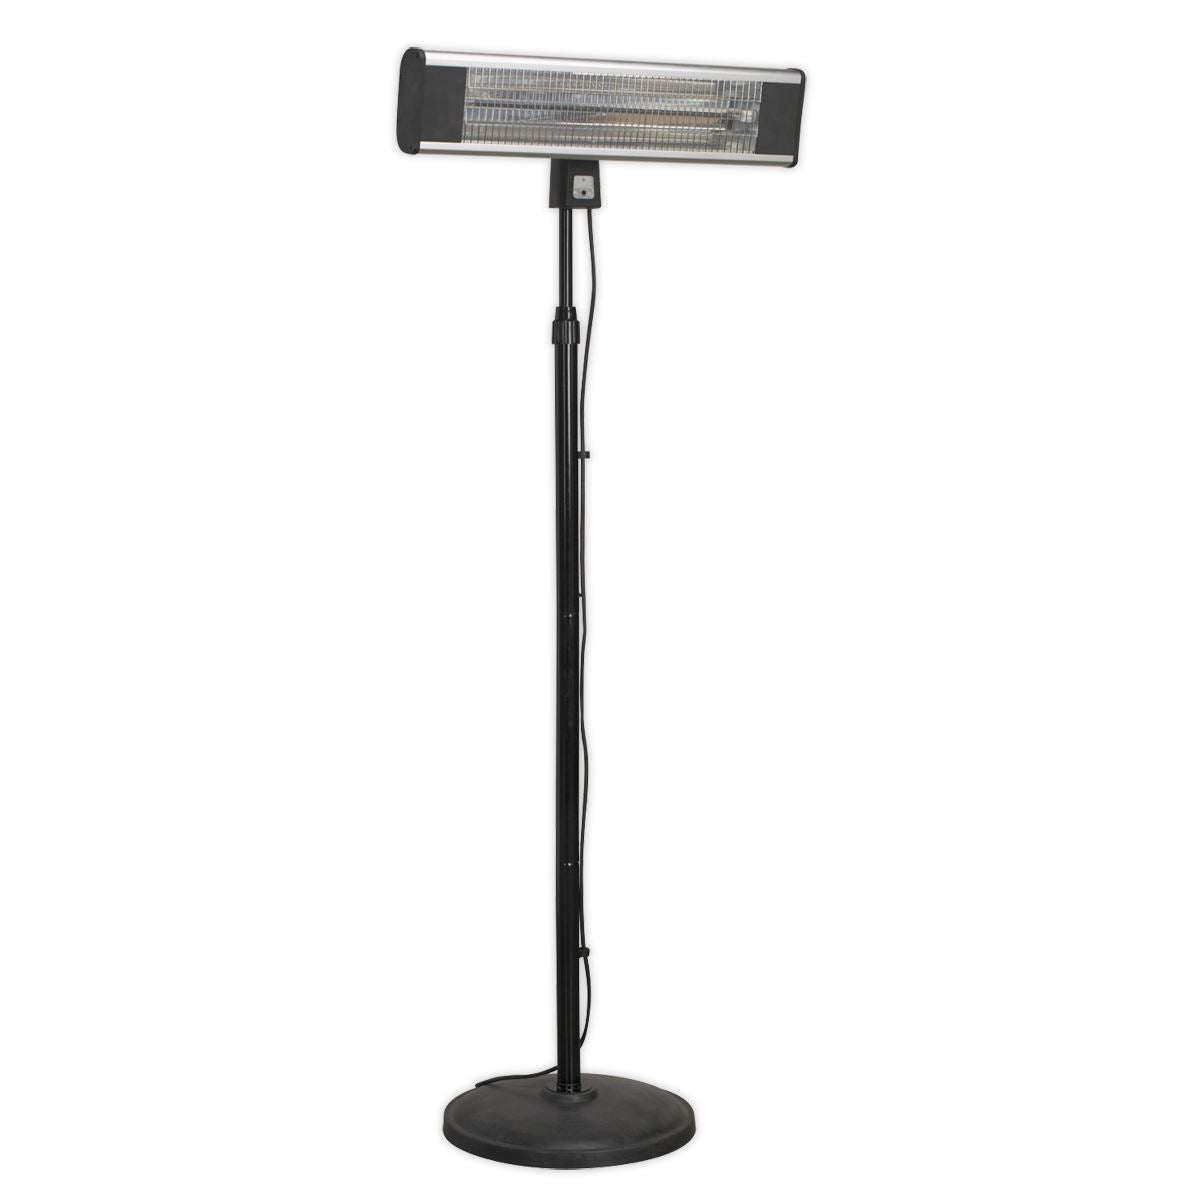 Sealey High Efficiency Carbon Fibre Infrared Patio Heater 1800W/230V with Telescopic Floor Stand